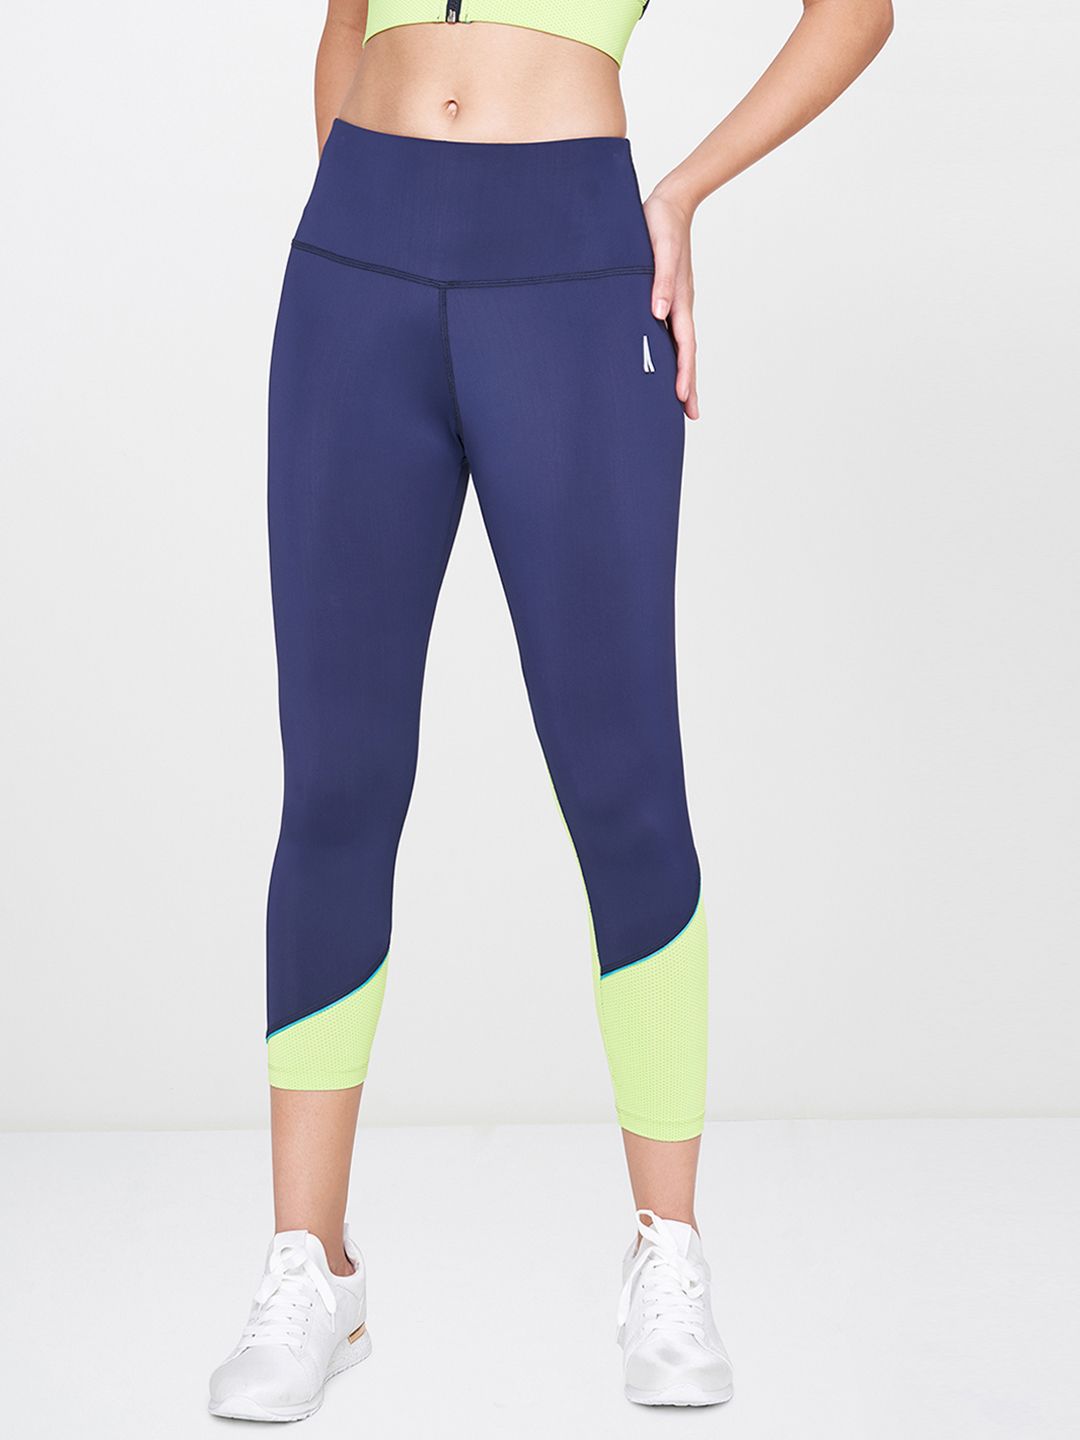 AND Women Blue & Fluorescent Green Solid 3/4th Activewear Tights Price in India